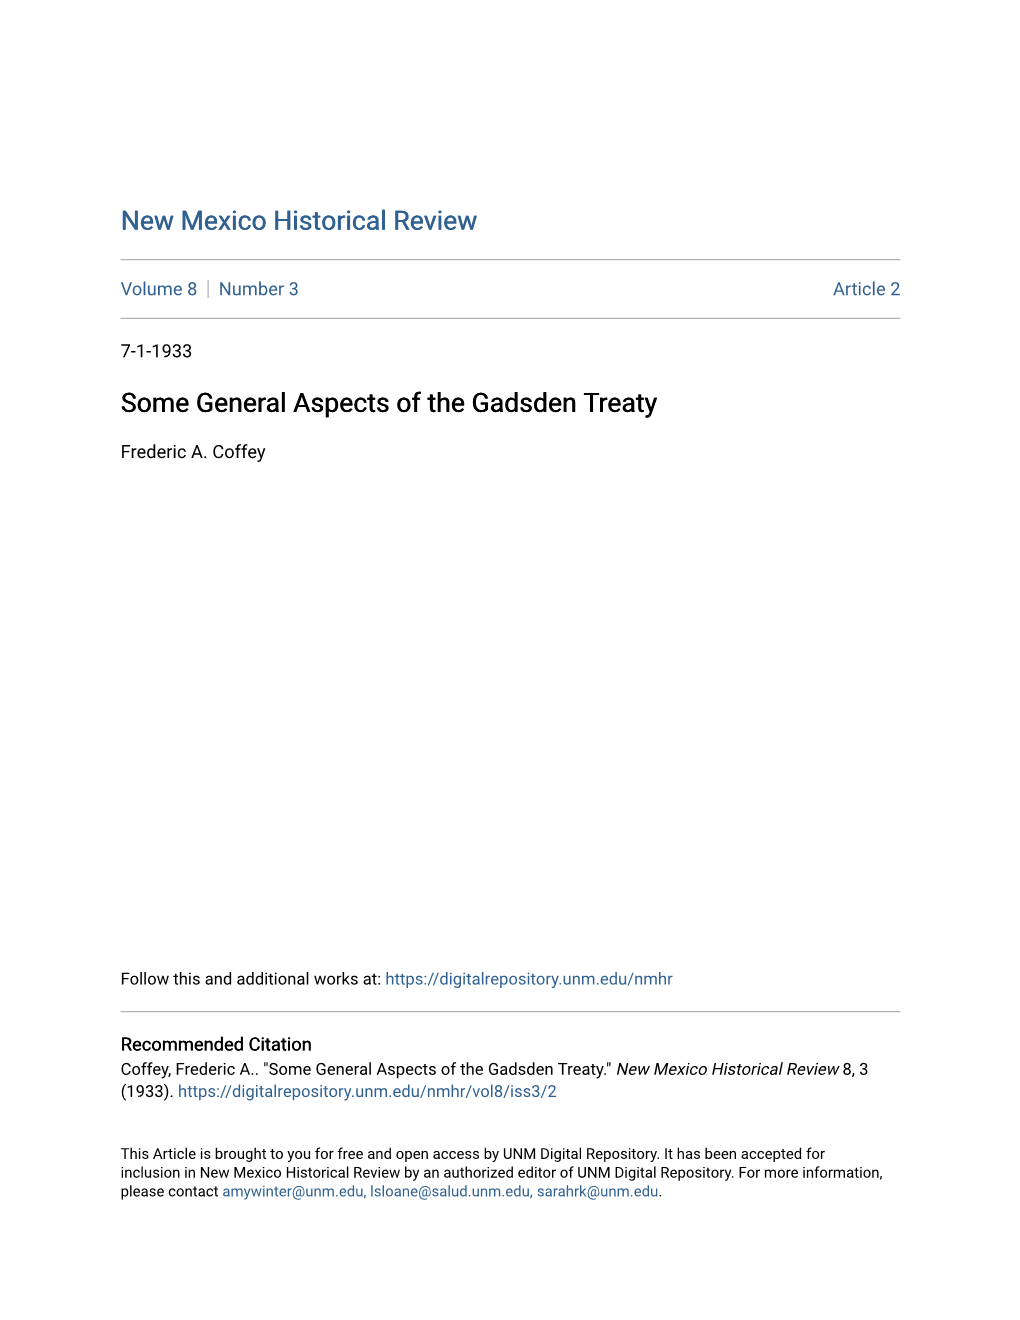 Some General Aspects of the Gadsden Treaty